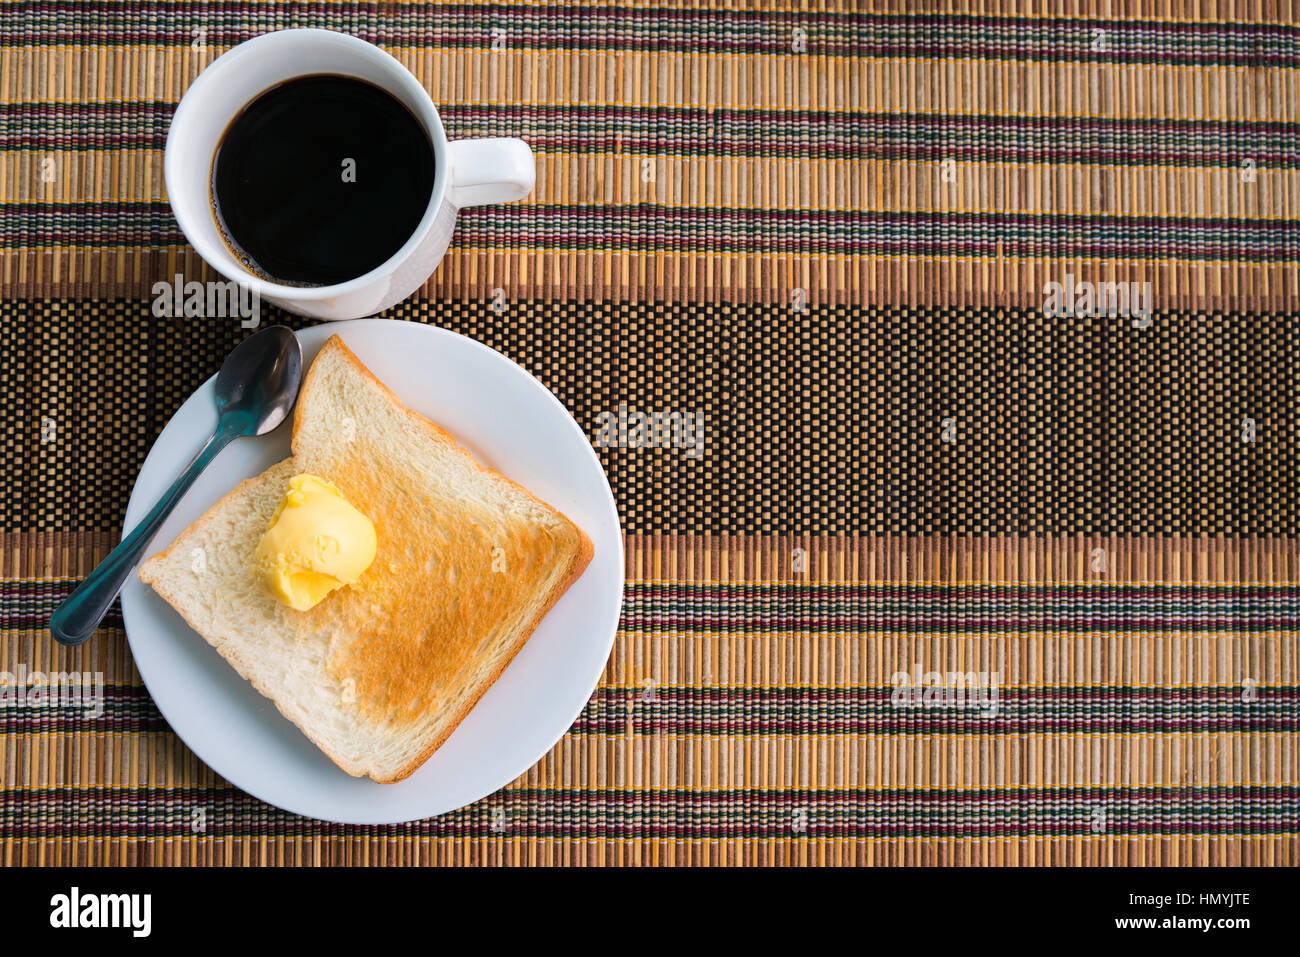 Served table for breakfast with toast, coffee and butter on tablemat with copy-space on right frame Stock Photo